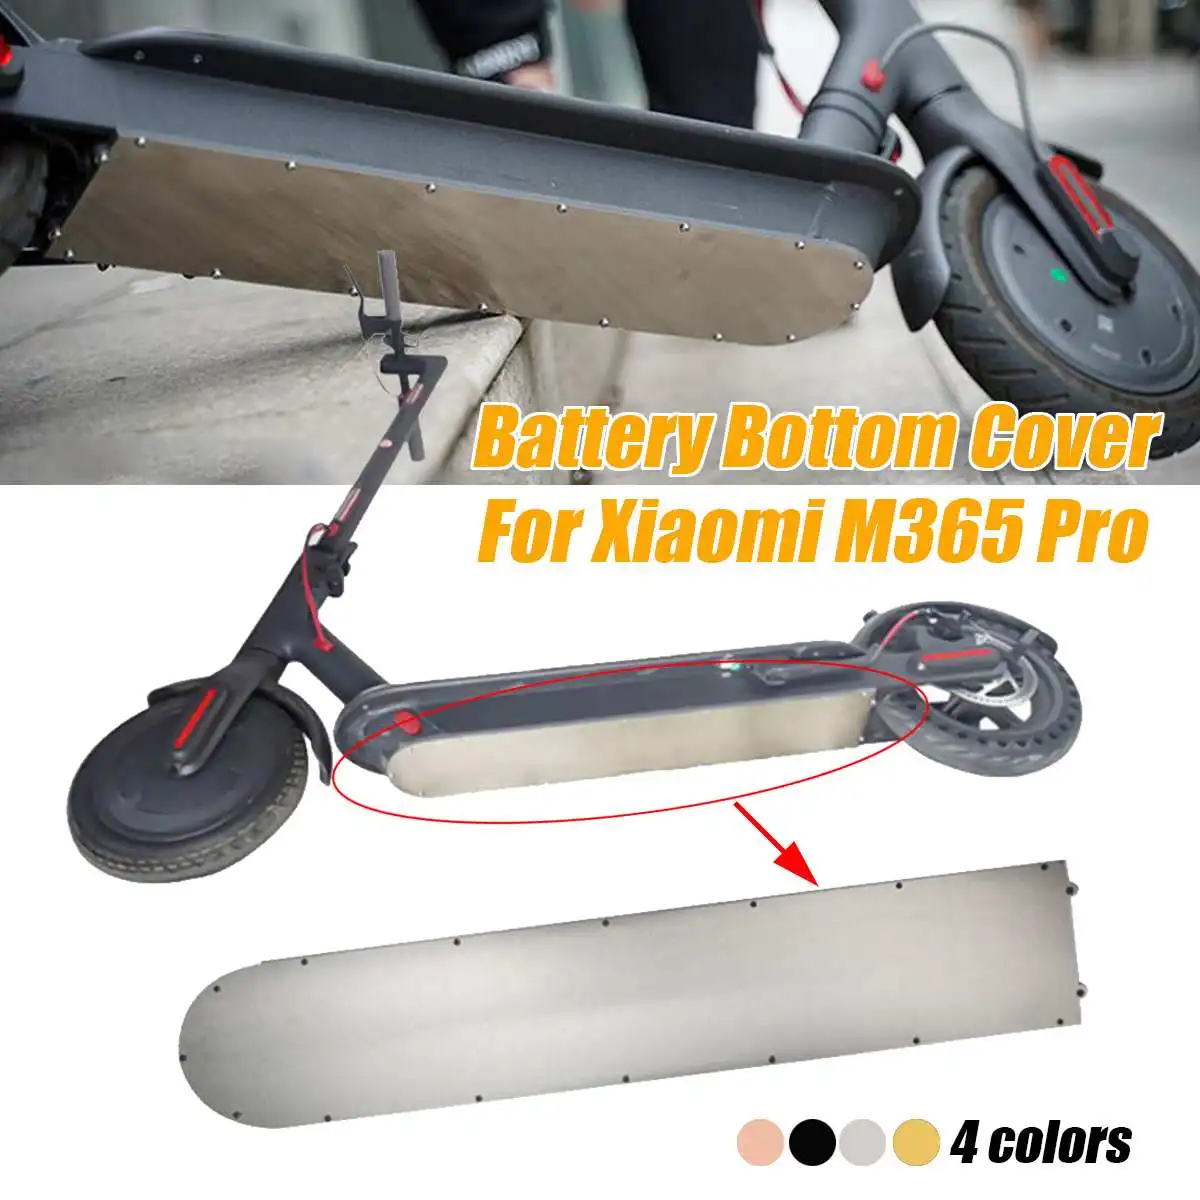 

4 Colors For Xiaomi M365 Pro Electric Scooter Chassis Shield Scooter Battery Bottom Cover Protection Stainless Steel Plate Skid